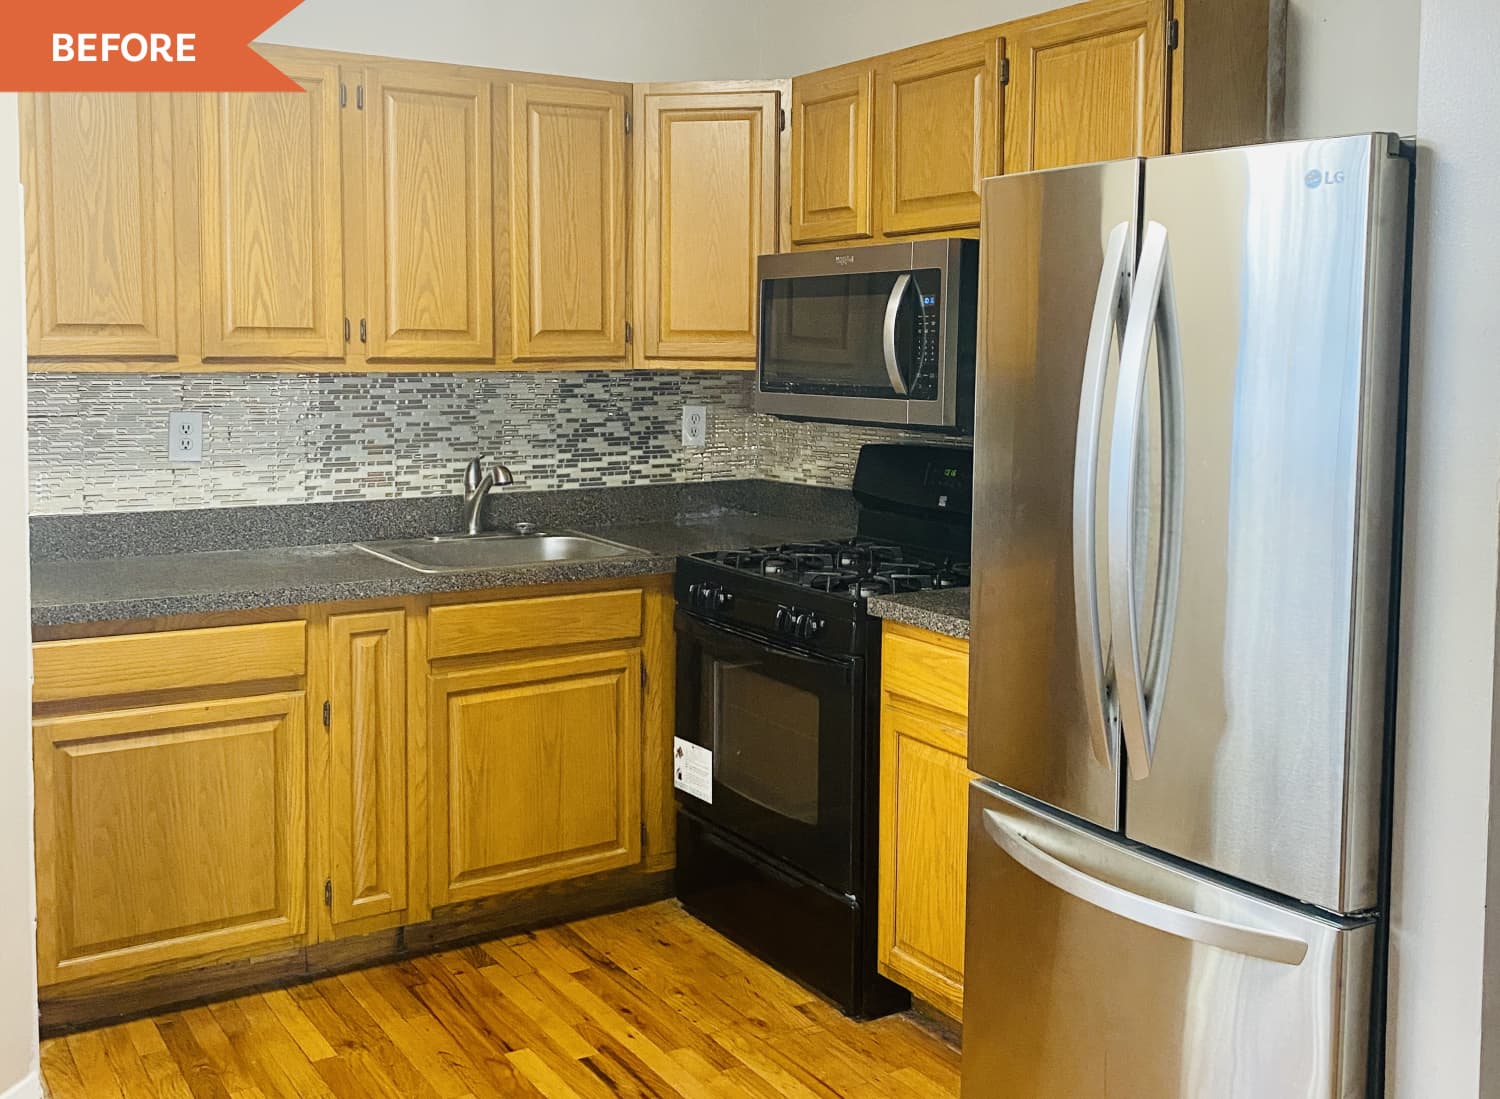 Before and After: The “IKEA Fairy” Transforms a Lackluster Kitchen into a Timeless Cook Space